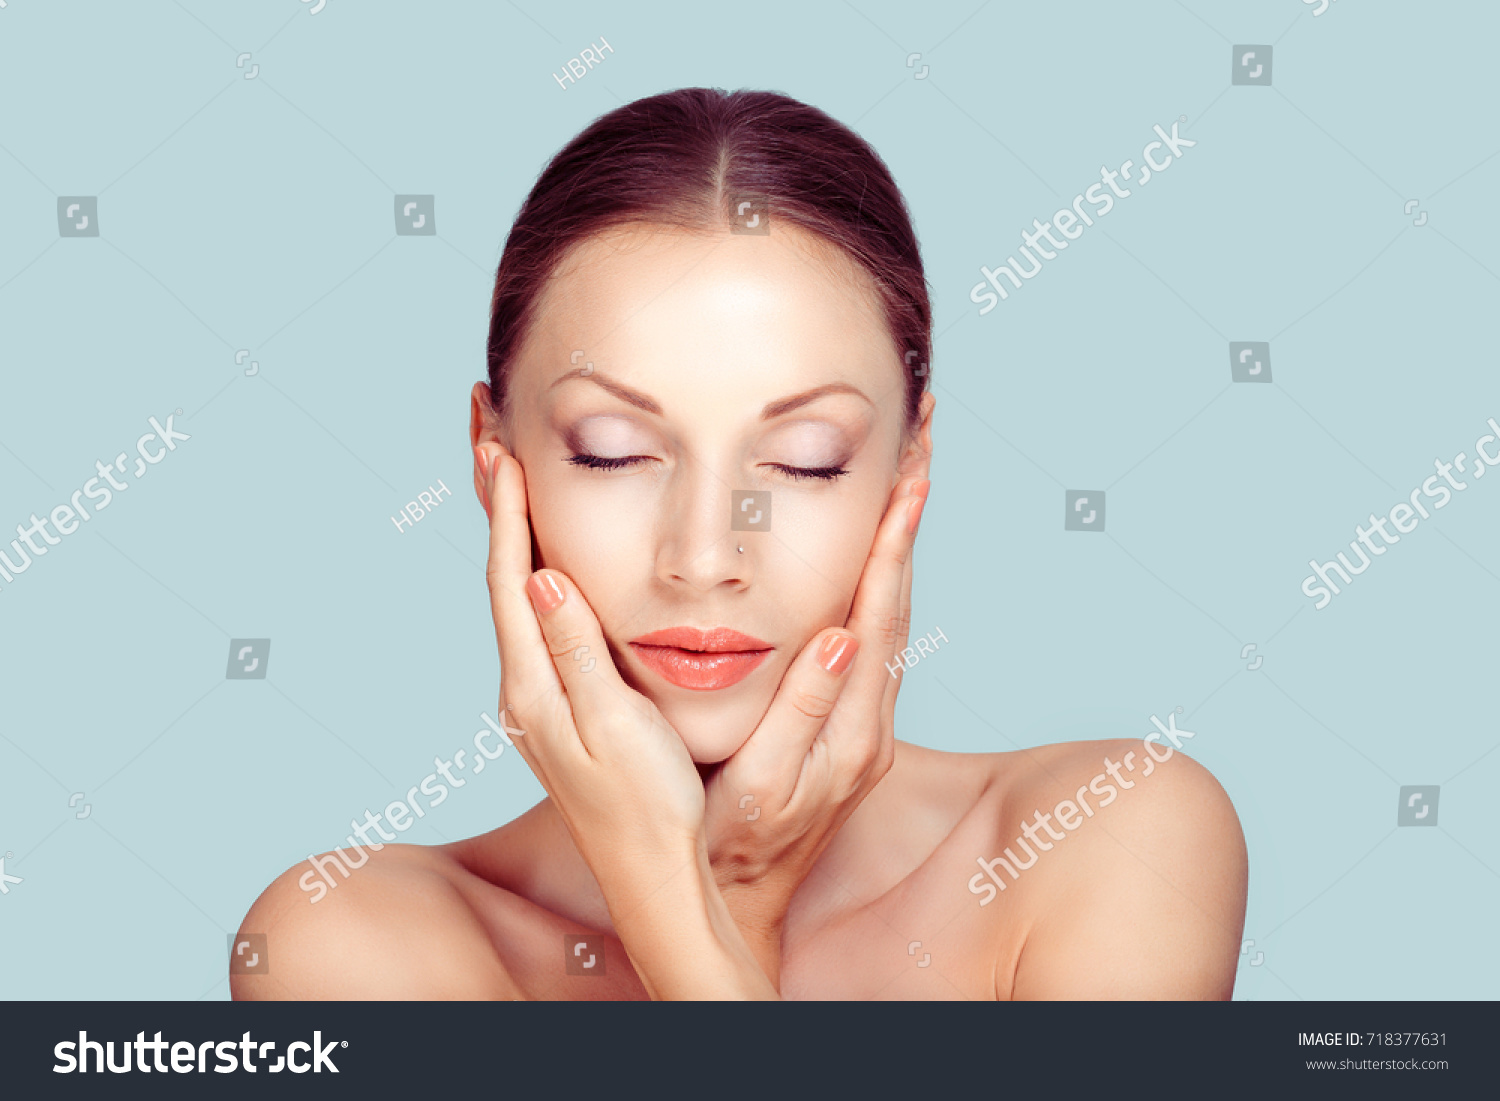 Beauty face of the young beautiful woman eyes closed - isolated on light blue #718377631